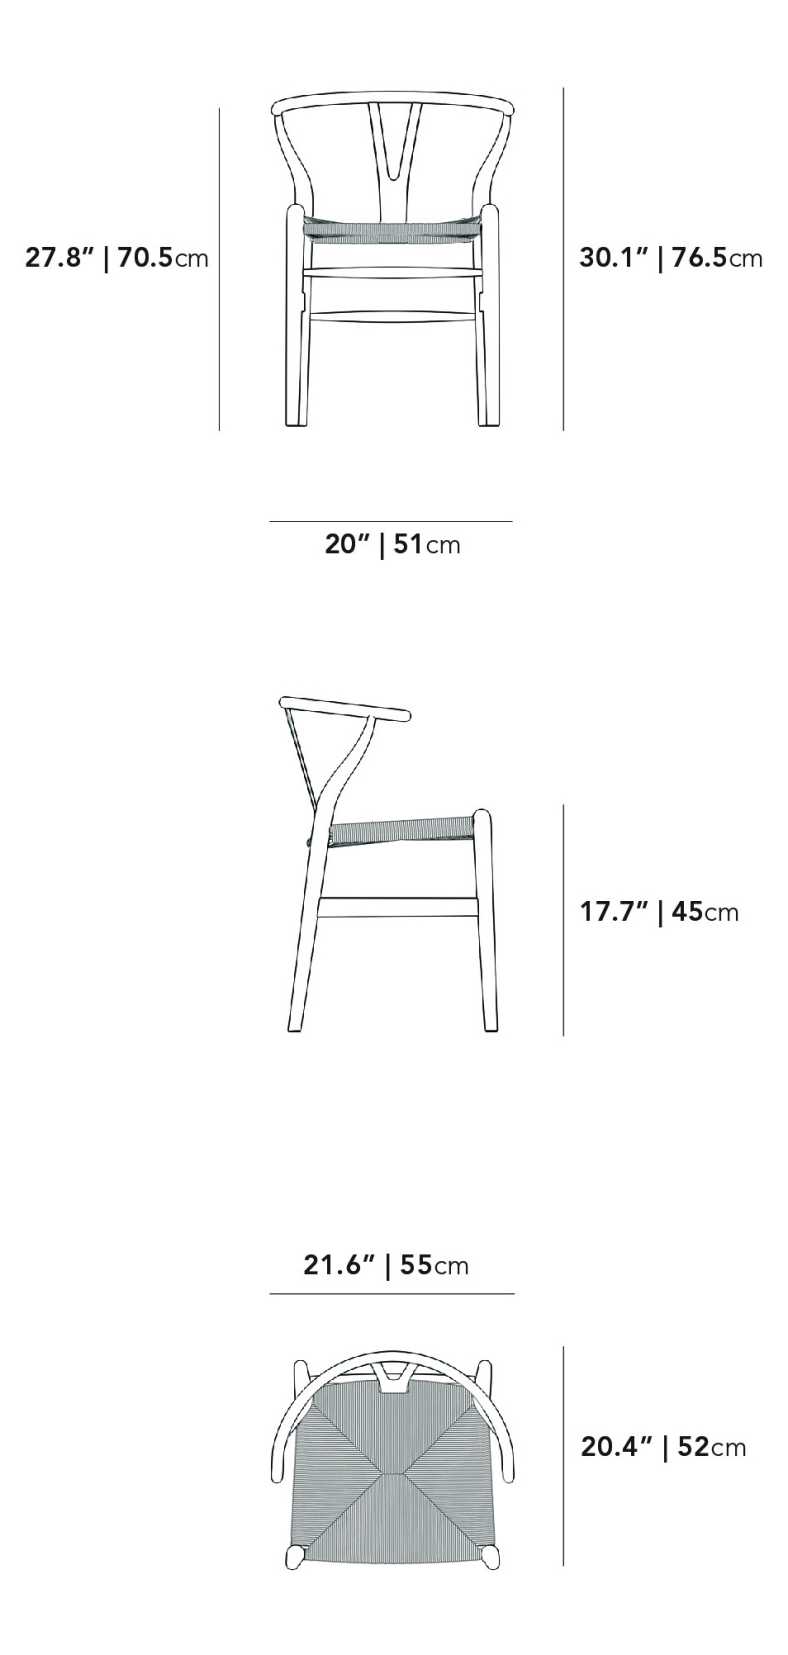 Dimensions for Wishbone Chair